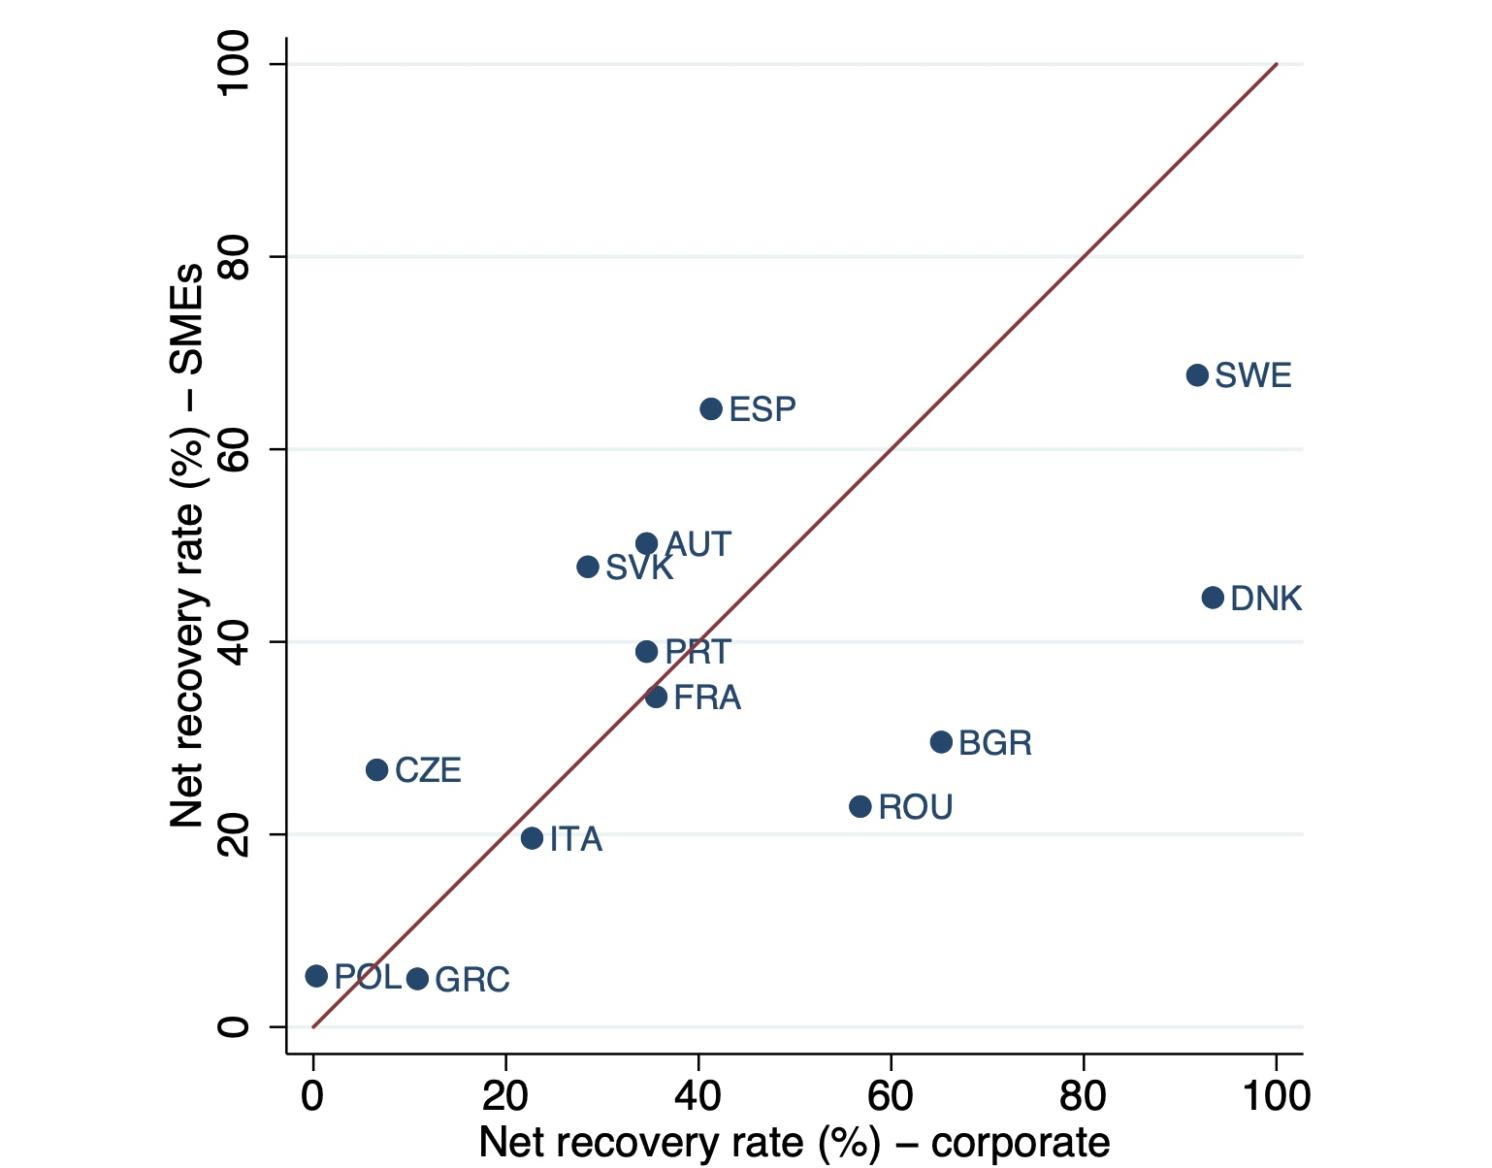 Figure 2 Net recovery rates for loans to corporates and small and medium enterprises in the EU